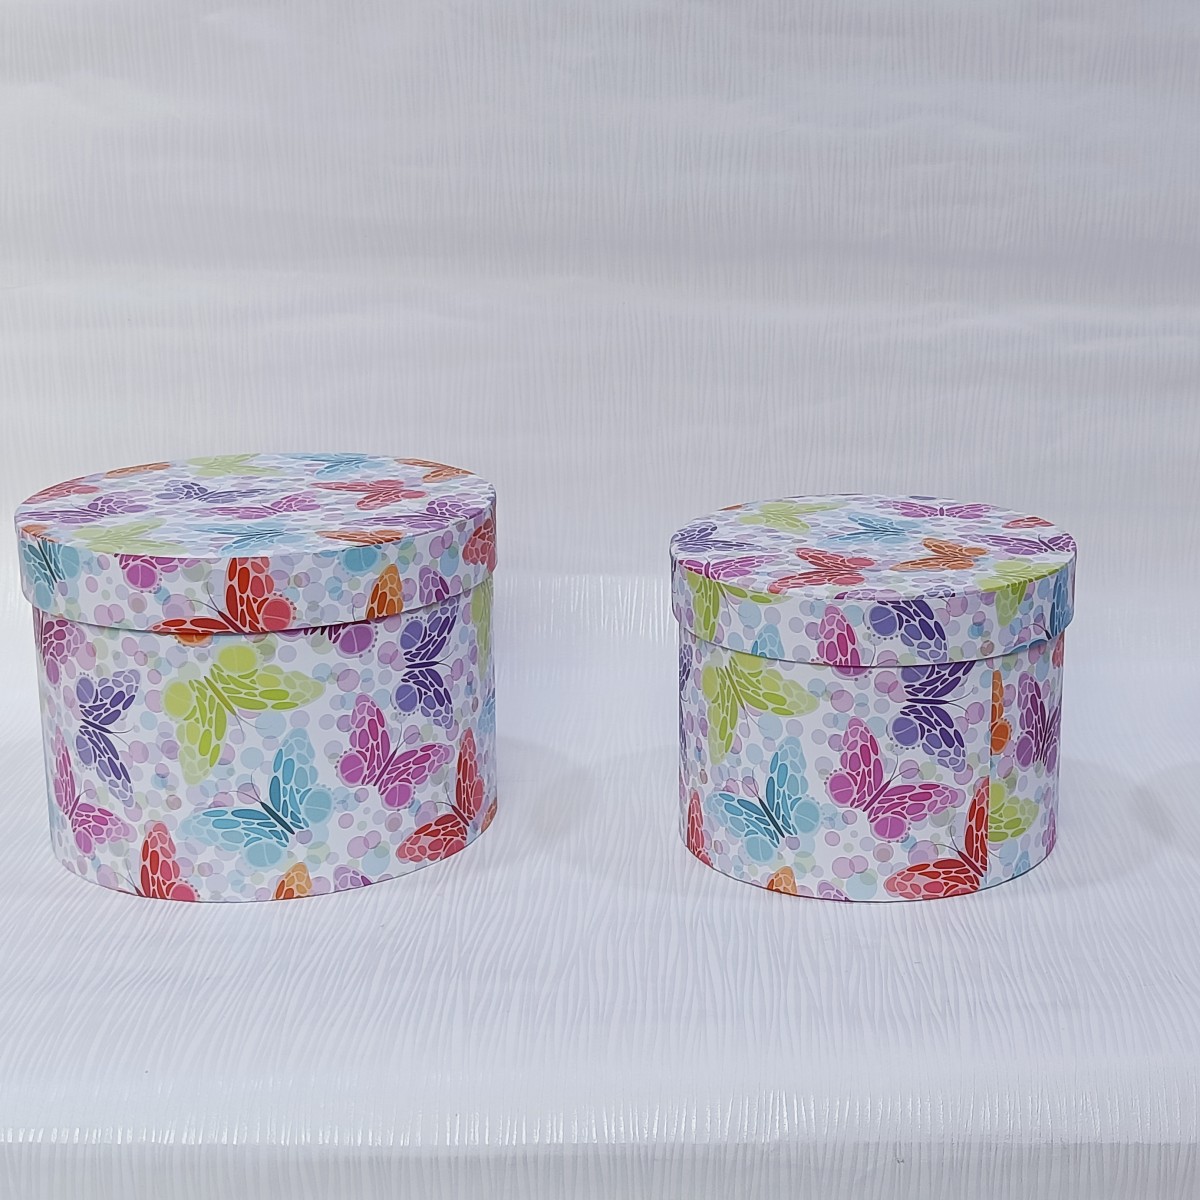 Oasis Floral Products Decorative Paper Gift Box Cardboard